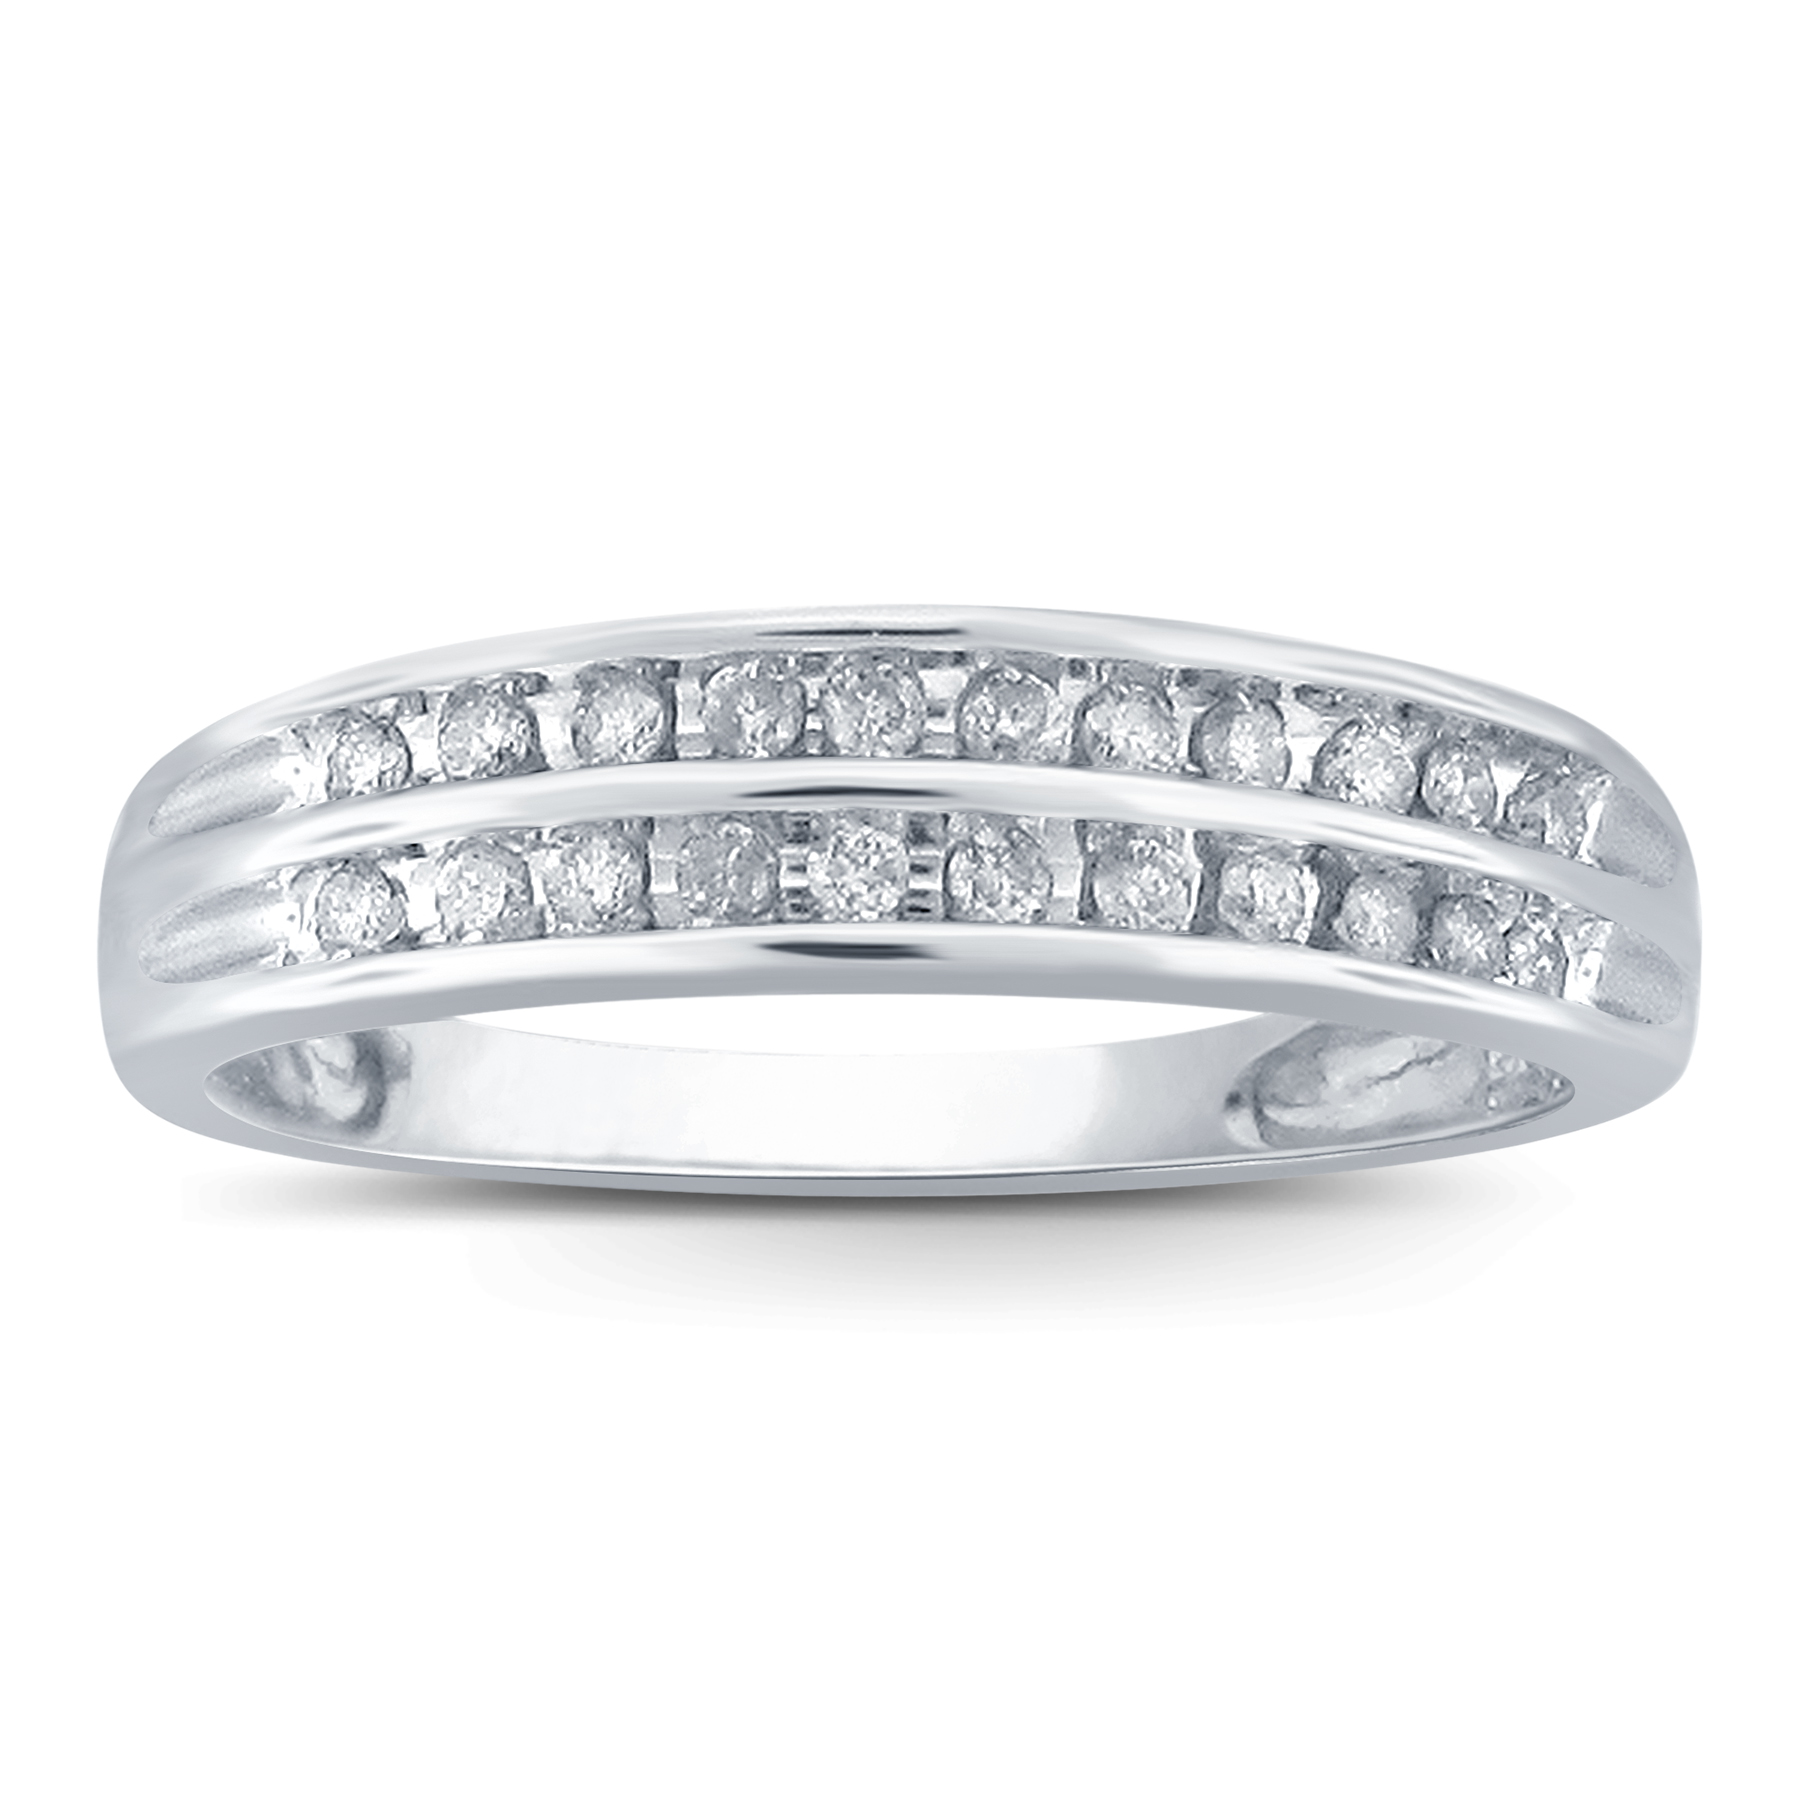 10K White Gold 1/5 CTTW Certified Diamond Double Row Band Ring